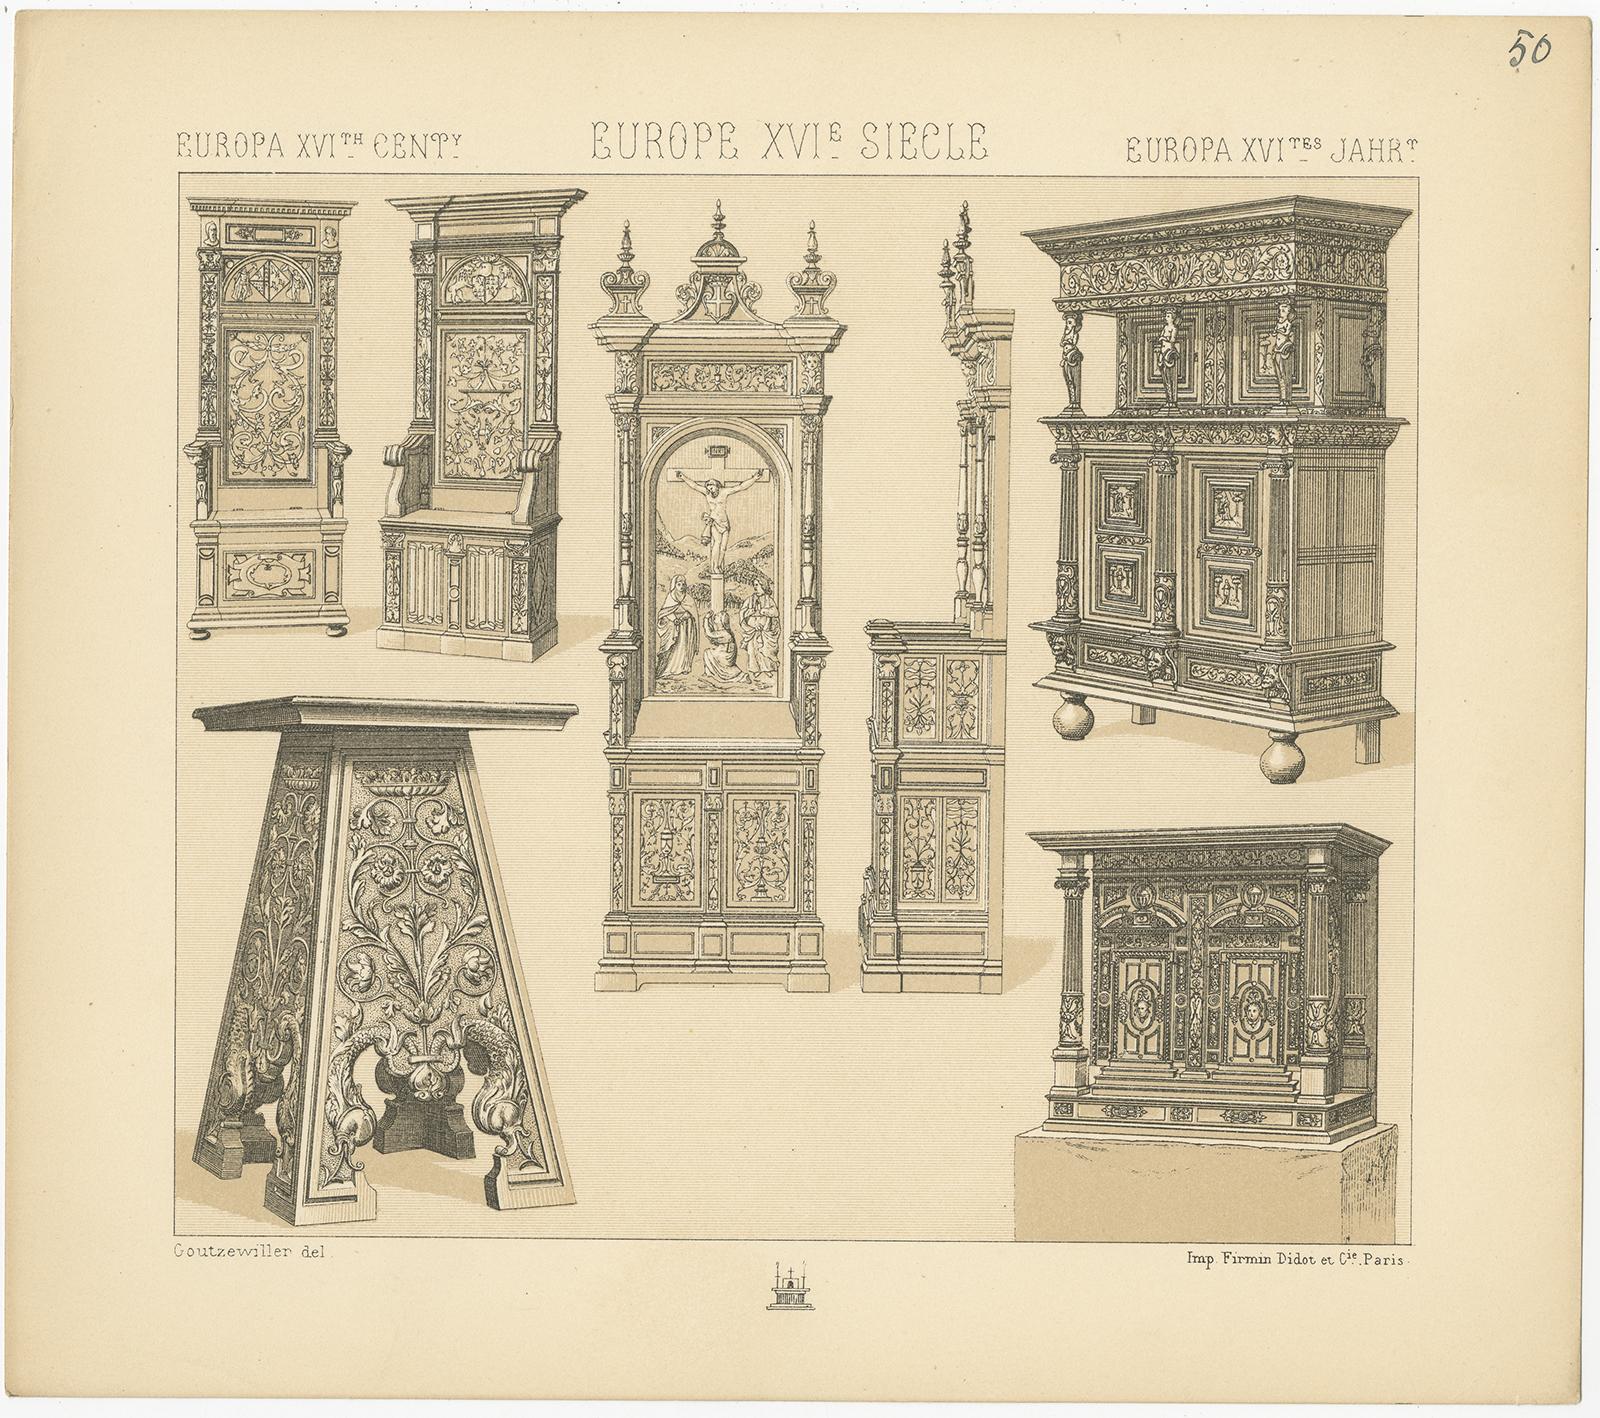 Antique print titled 'Europa XVIth Cent - Europe XVIe, Siecle - Europa XVItes Jahr'. Chromolithograph of European 16th century furniture. This print originates from 'Le Costume Historique' by M.A. Racinet. Published, circa 1880.